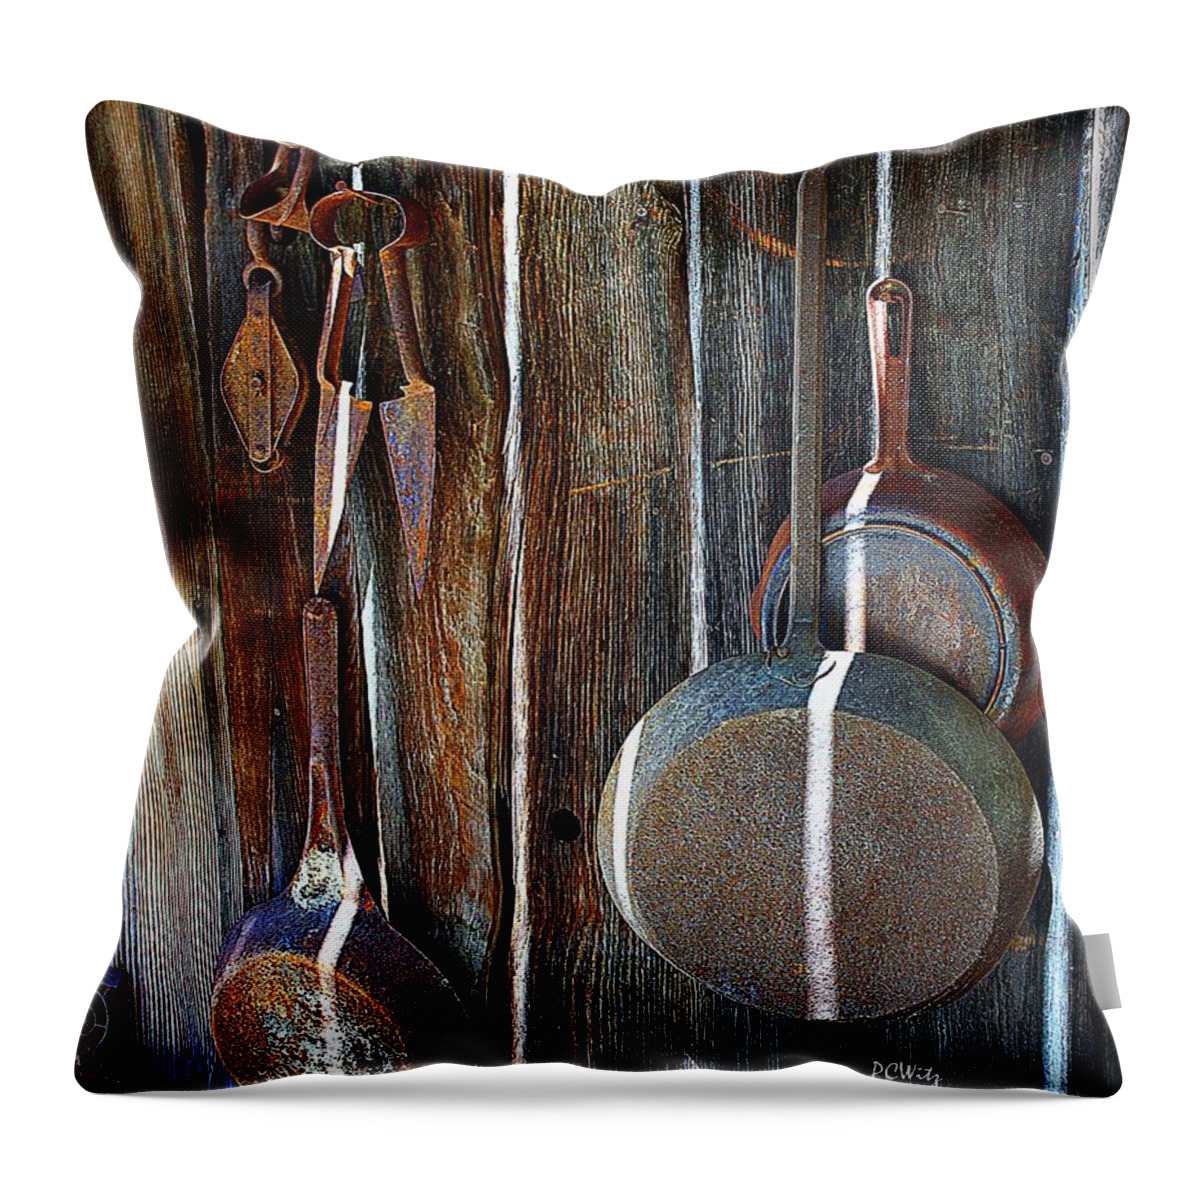 Iron Skillets Throw Pillow featuring the photograph Iron Skillets by Patrick Witz